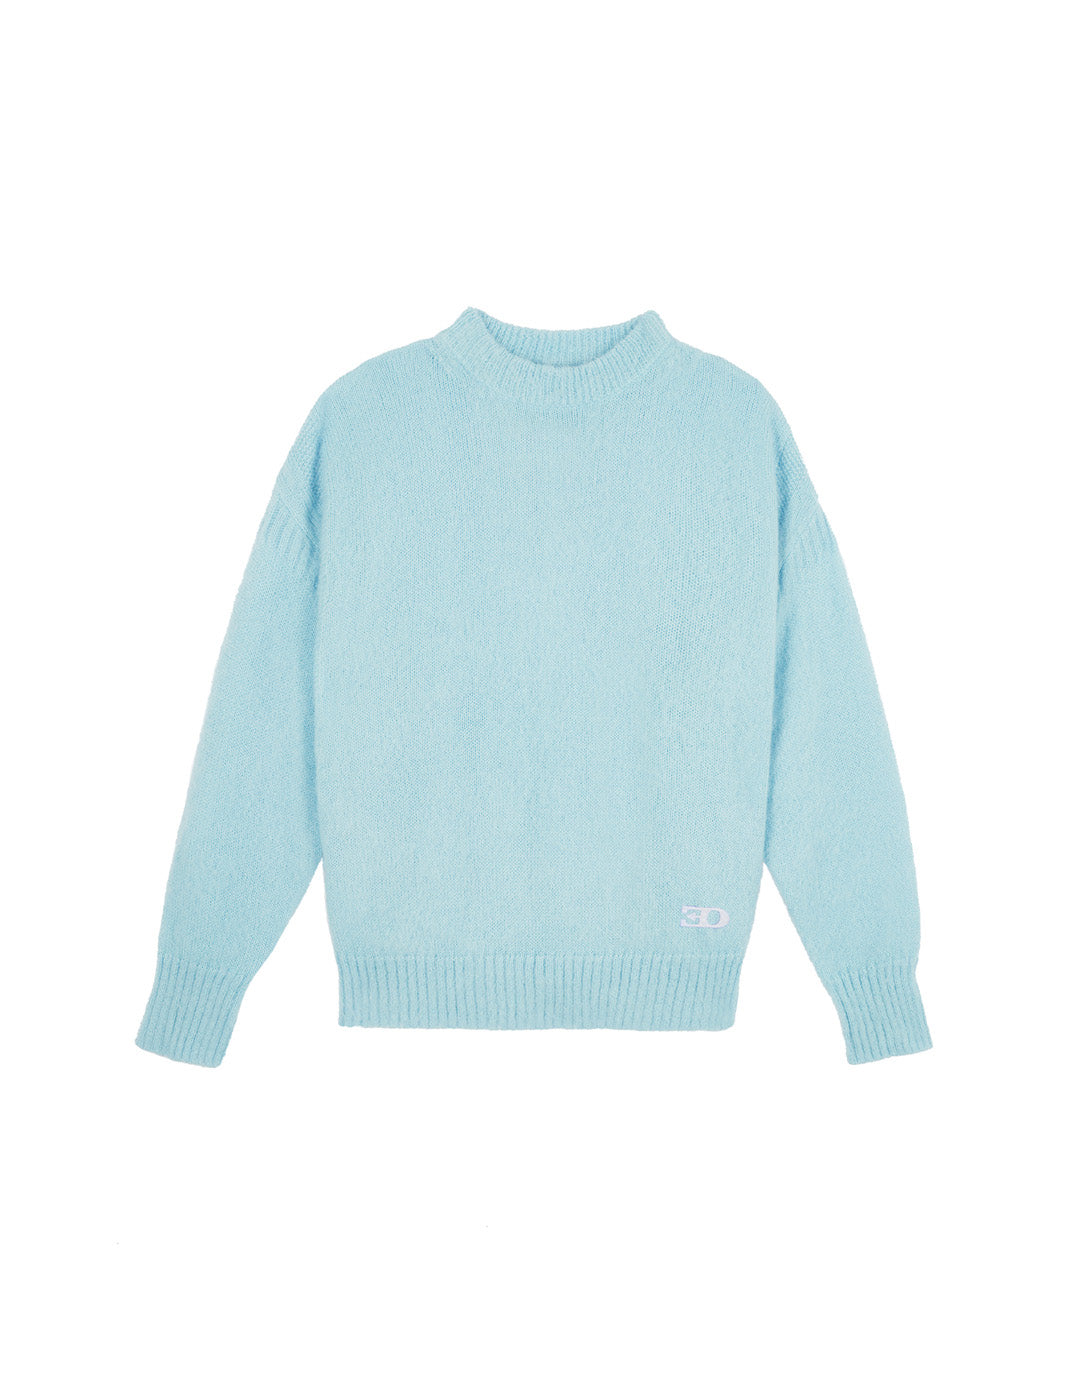 THE GUERNSEY JUMPER IN LIGHT TURQUOISE MOHAIR